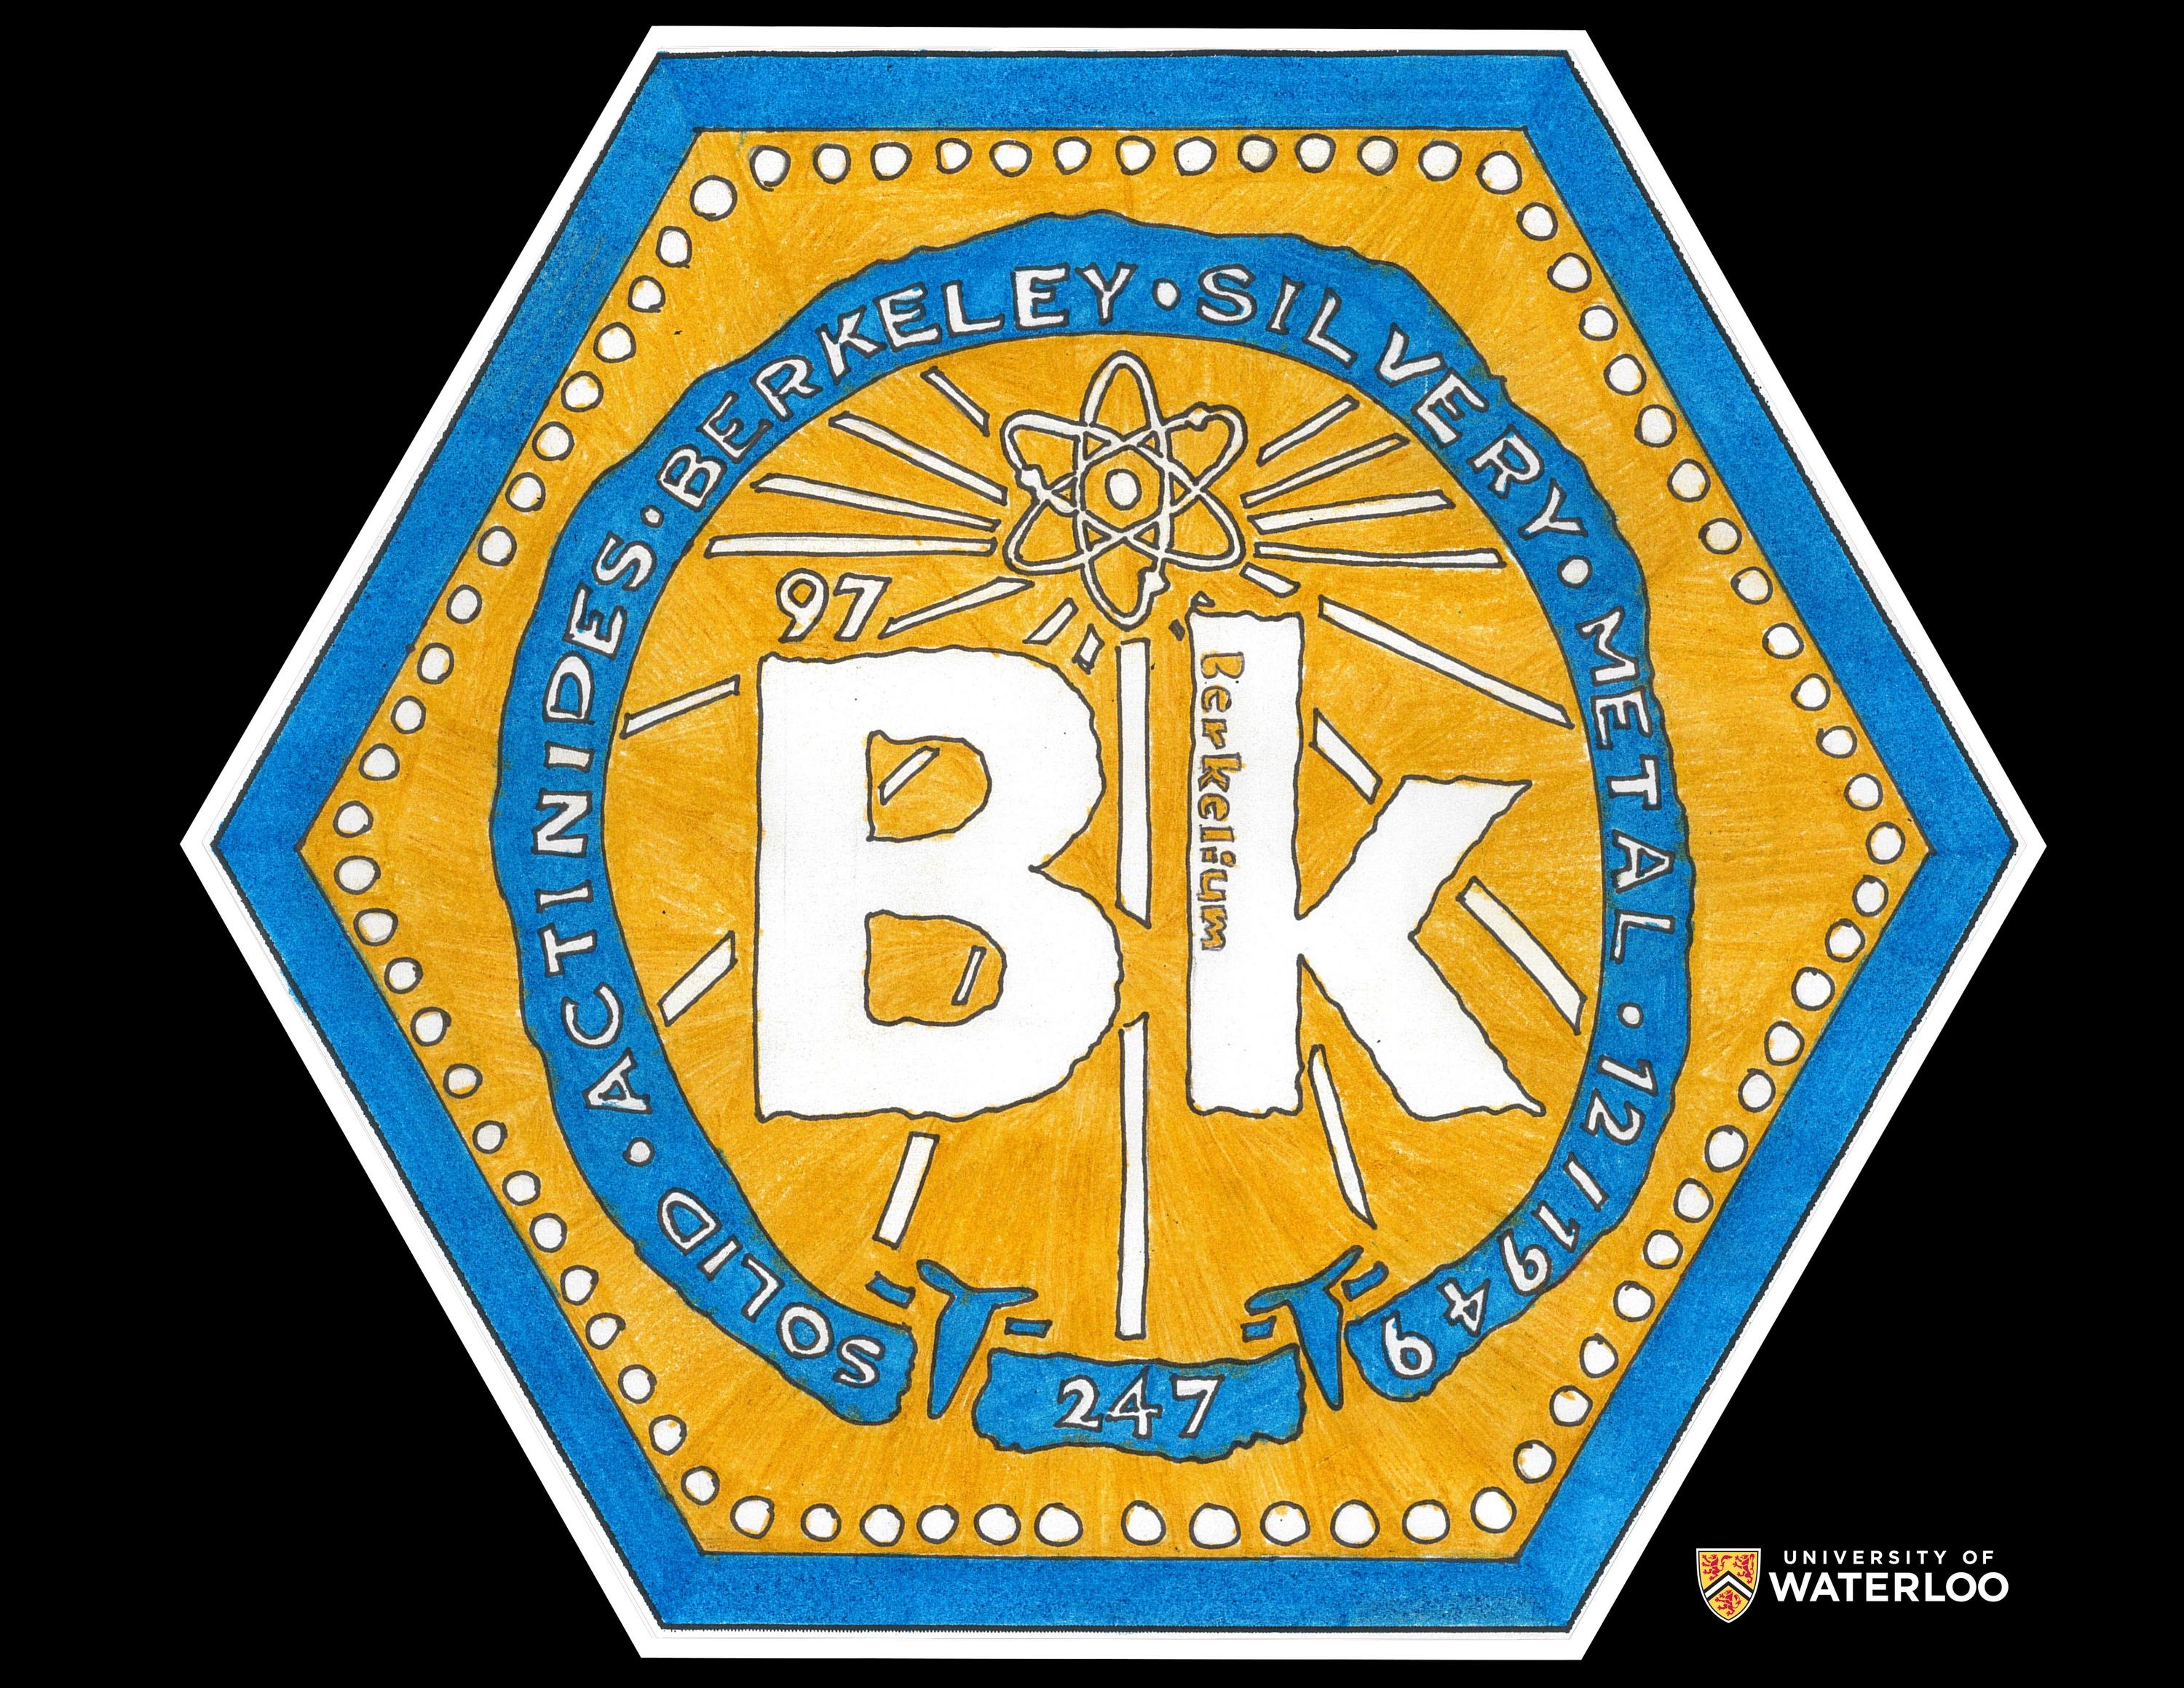 Colored pen and ink with an orange background with blue border. Centre in the middle of a blue circle is the chemical symbol “Bk” with “Berkelium” written in the “k” and a small “97” just above the “B”. Above is a radioactive symbol with lines radiating out. Within the circle are the words “Solid”, “actinides”, “Berkeley”, “Silvery”, “Metal”, “12,1949” and “247”.